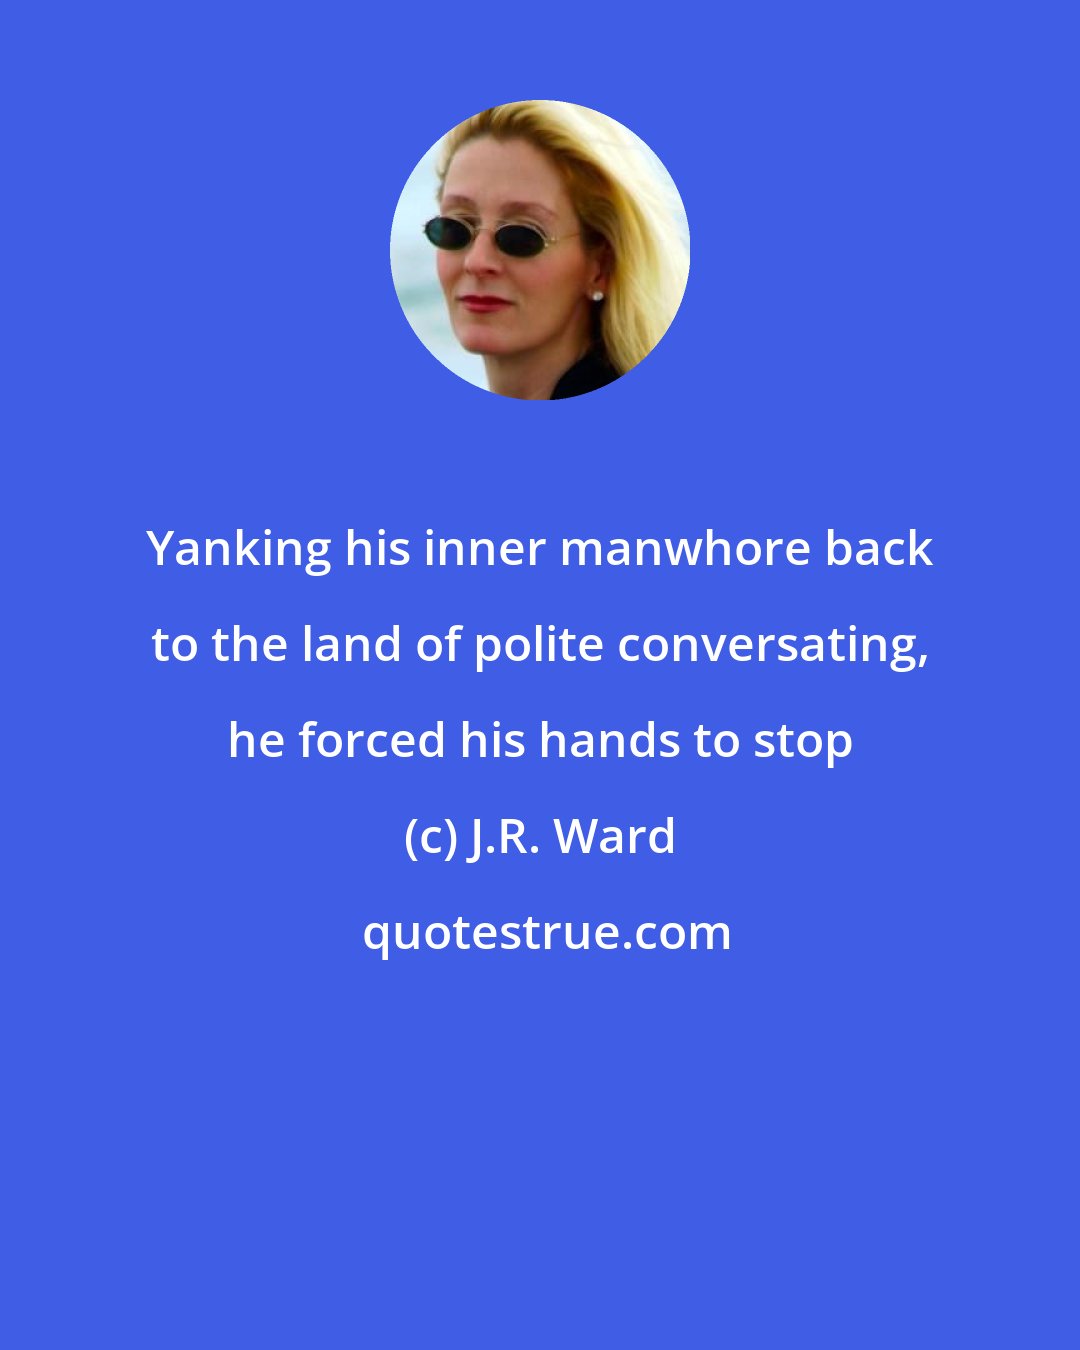 J.R. Ward: Yanking his inner manwhore back to the land of polite conversating, he forced his hands to stop